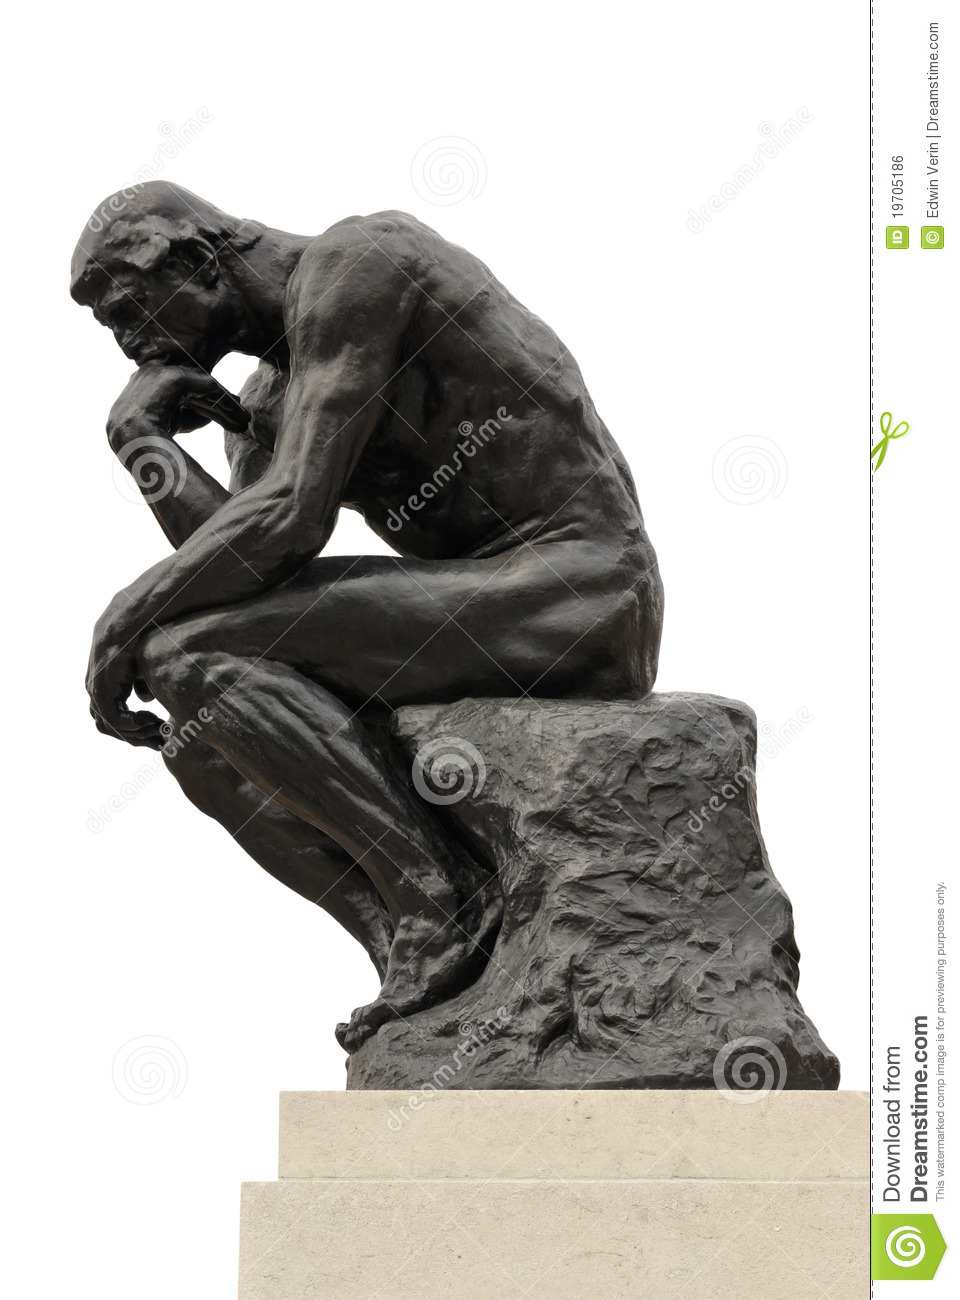 Statue Of The Thinker By Famous French Sculptor Auguste Rodin